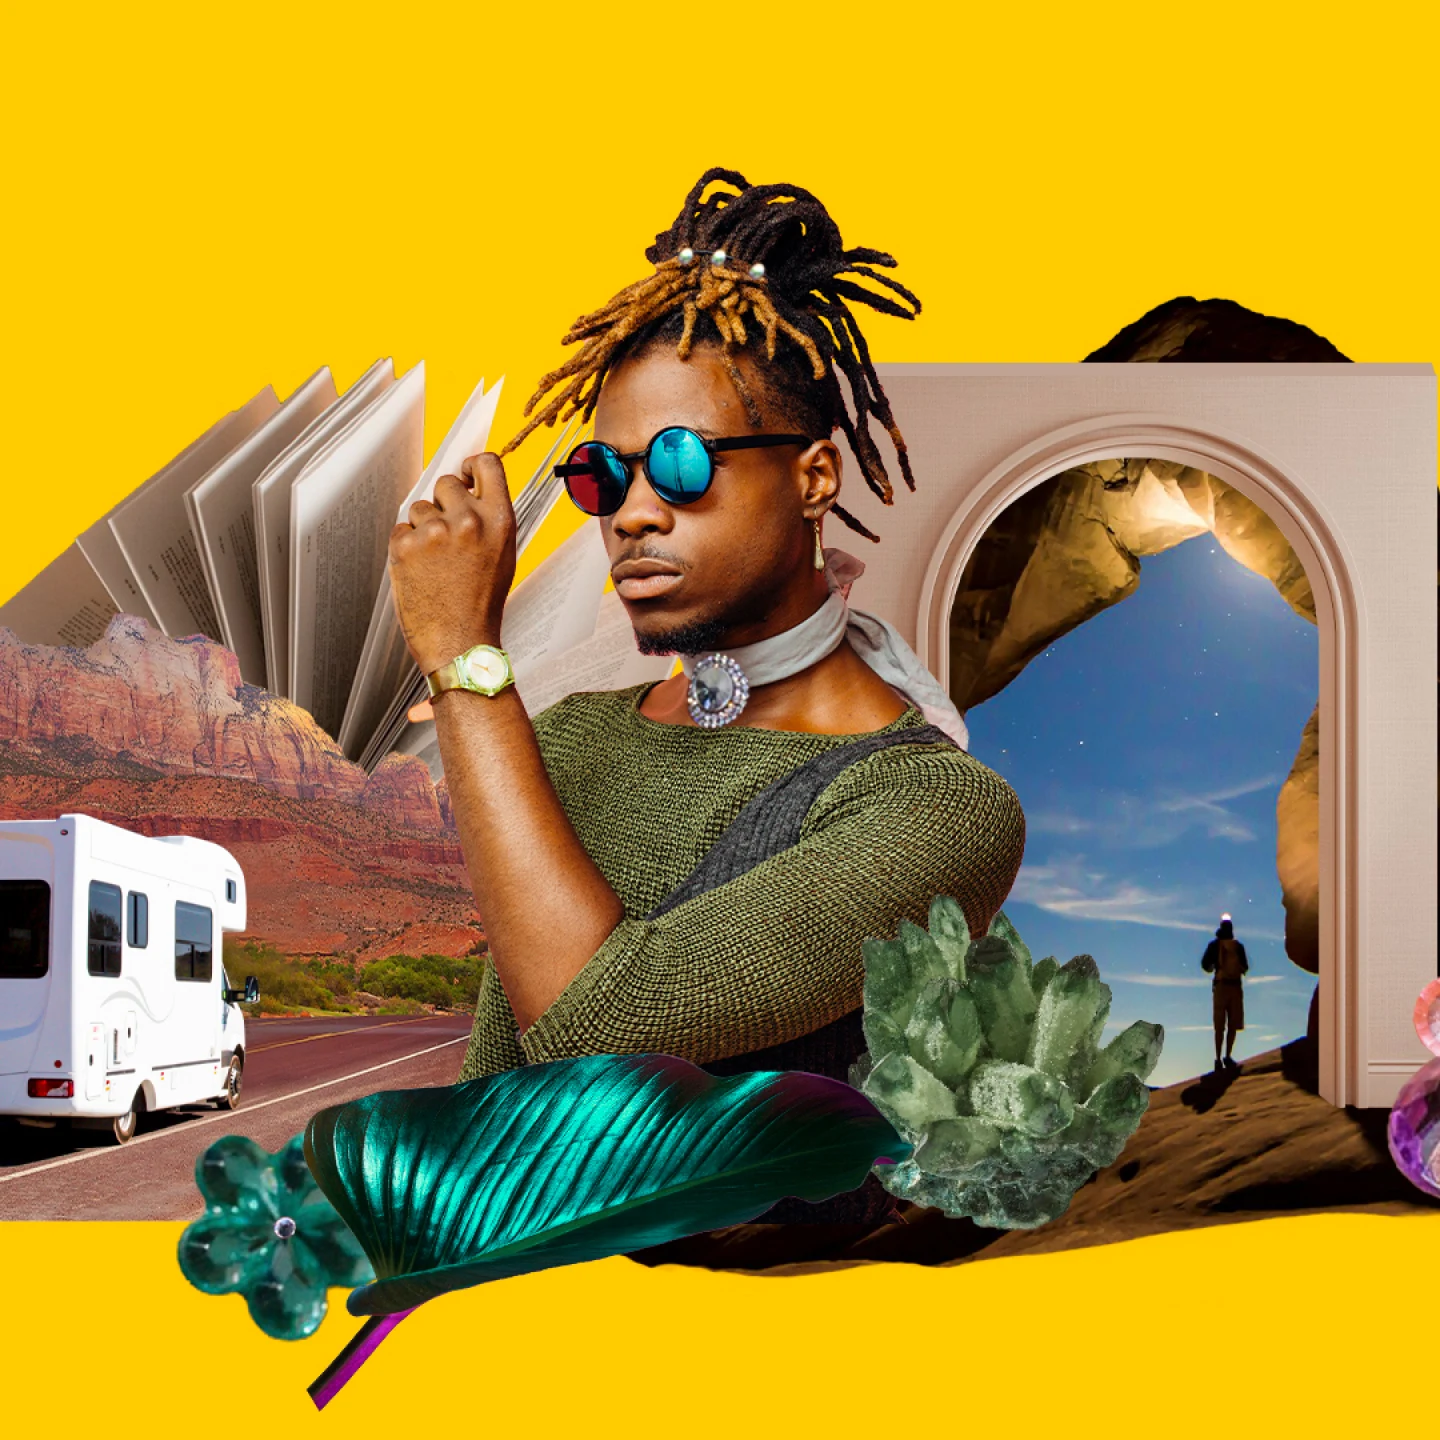 On a yellow background, Black man at center with brown and blonde locs, green knit shirt and dark reflective sunglasses. Archway at right with sky at dusk. Someone stands in a cave looking at a sunset. Open pages of a book at left, above a white camper.